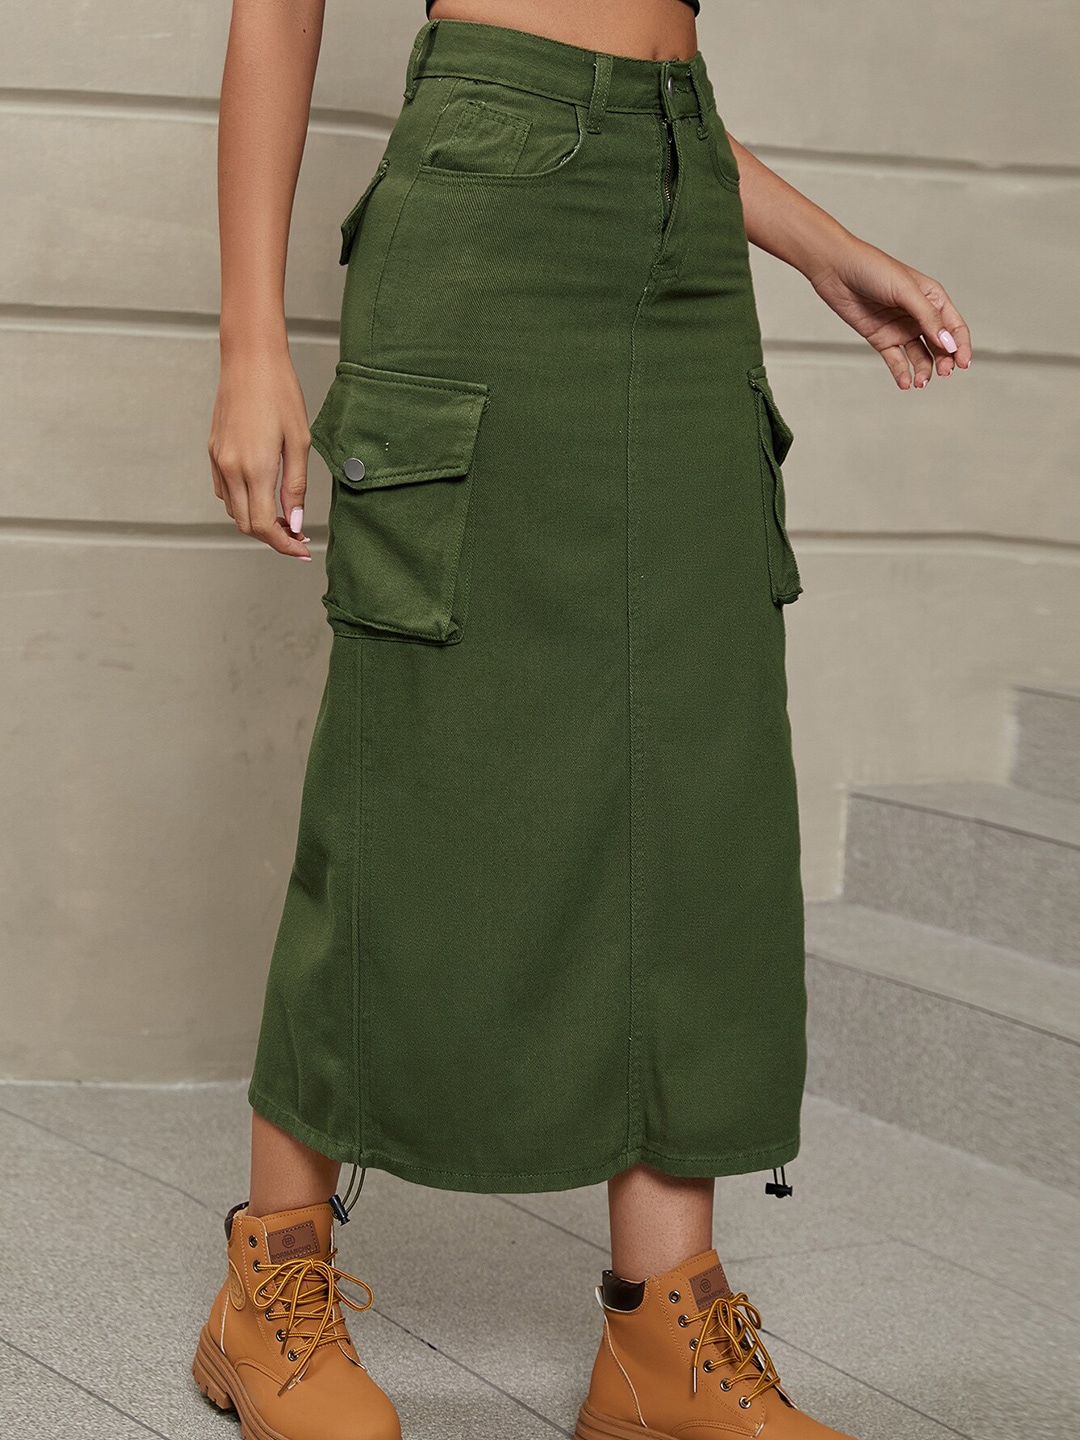 BoStreet Green Solid Straight Midi Skirt With Pocket Detailing Price in India